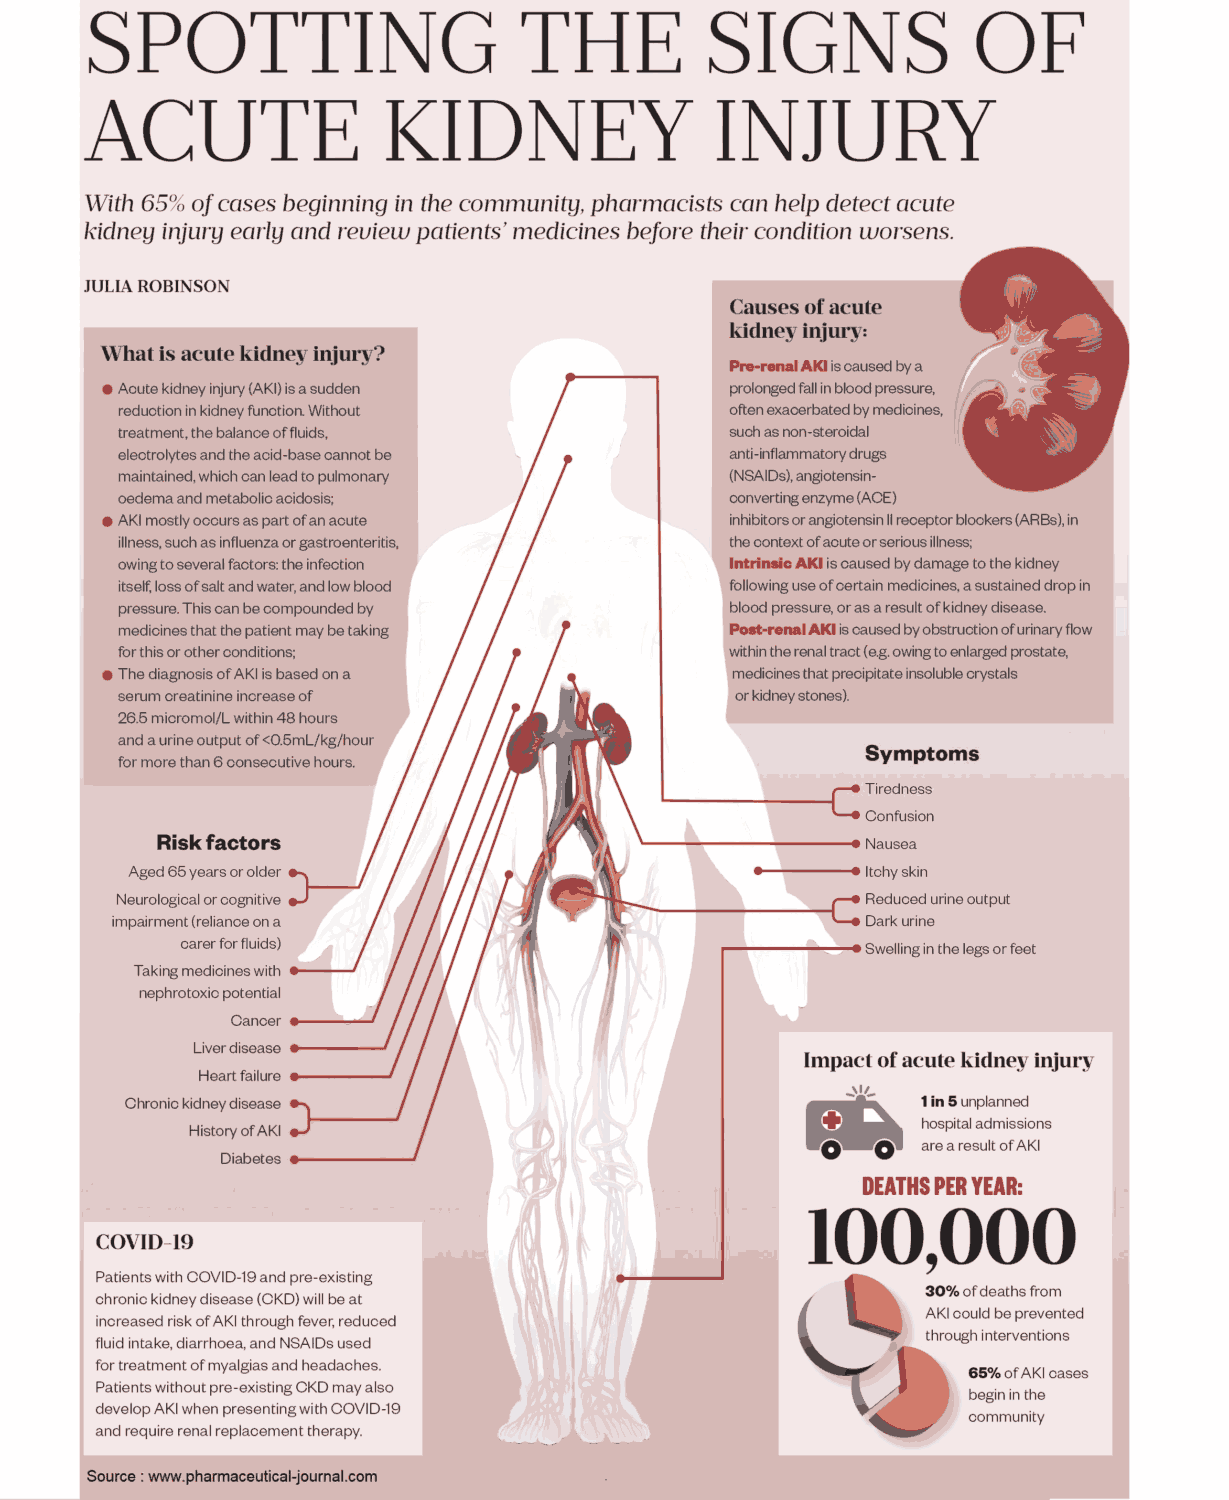 Acute Kidney Injury - Causes, Risk Factors and Symptoms